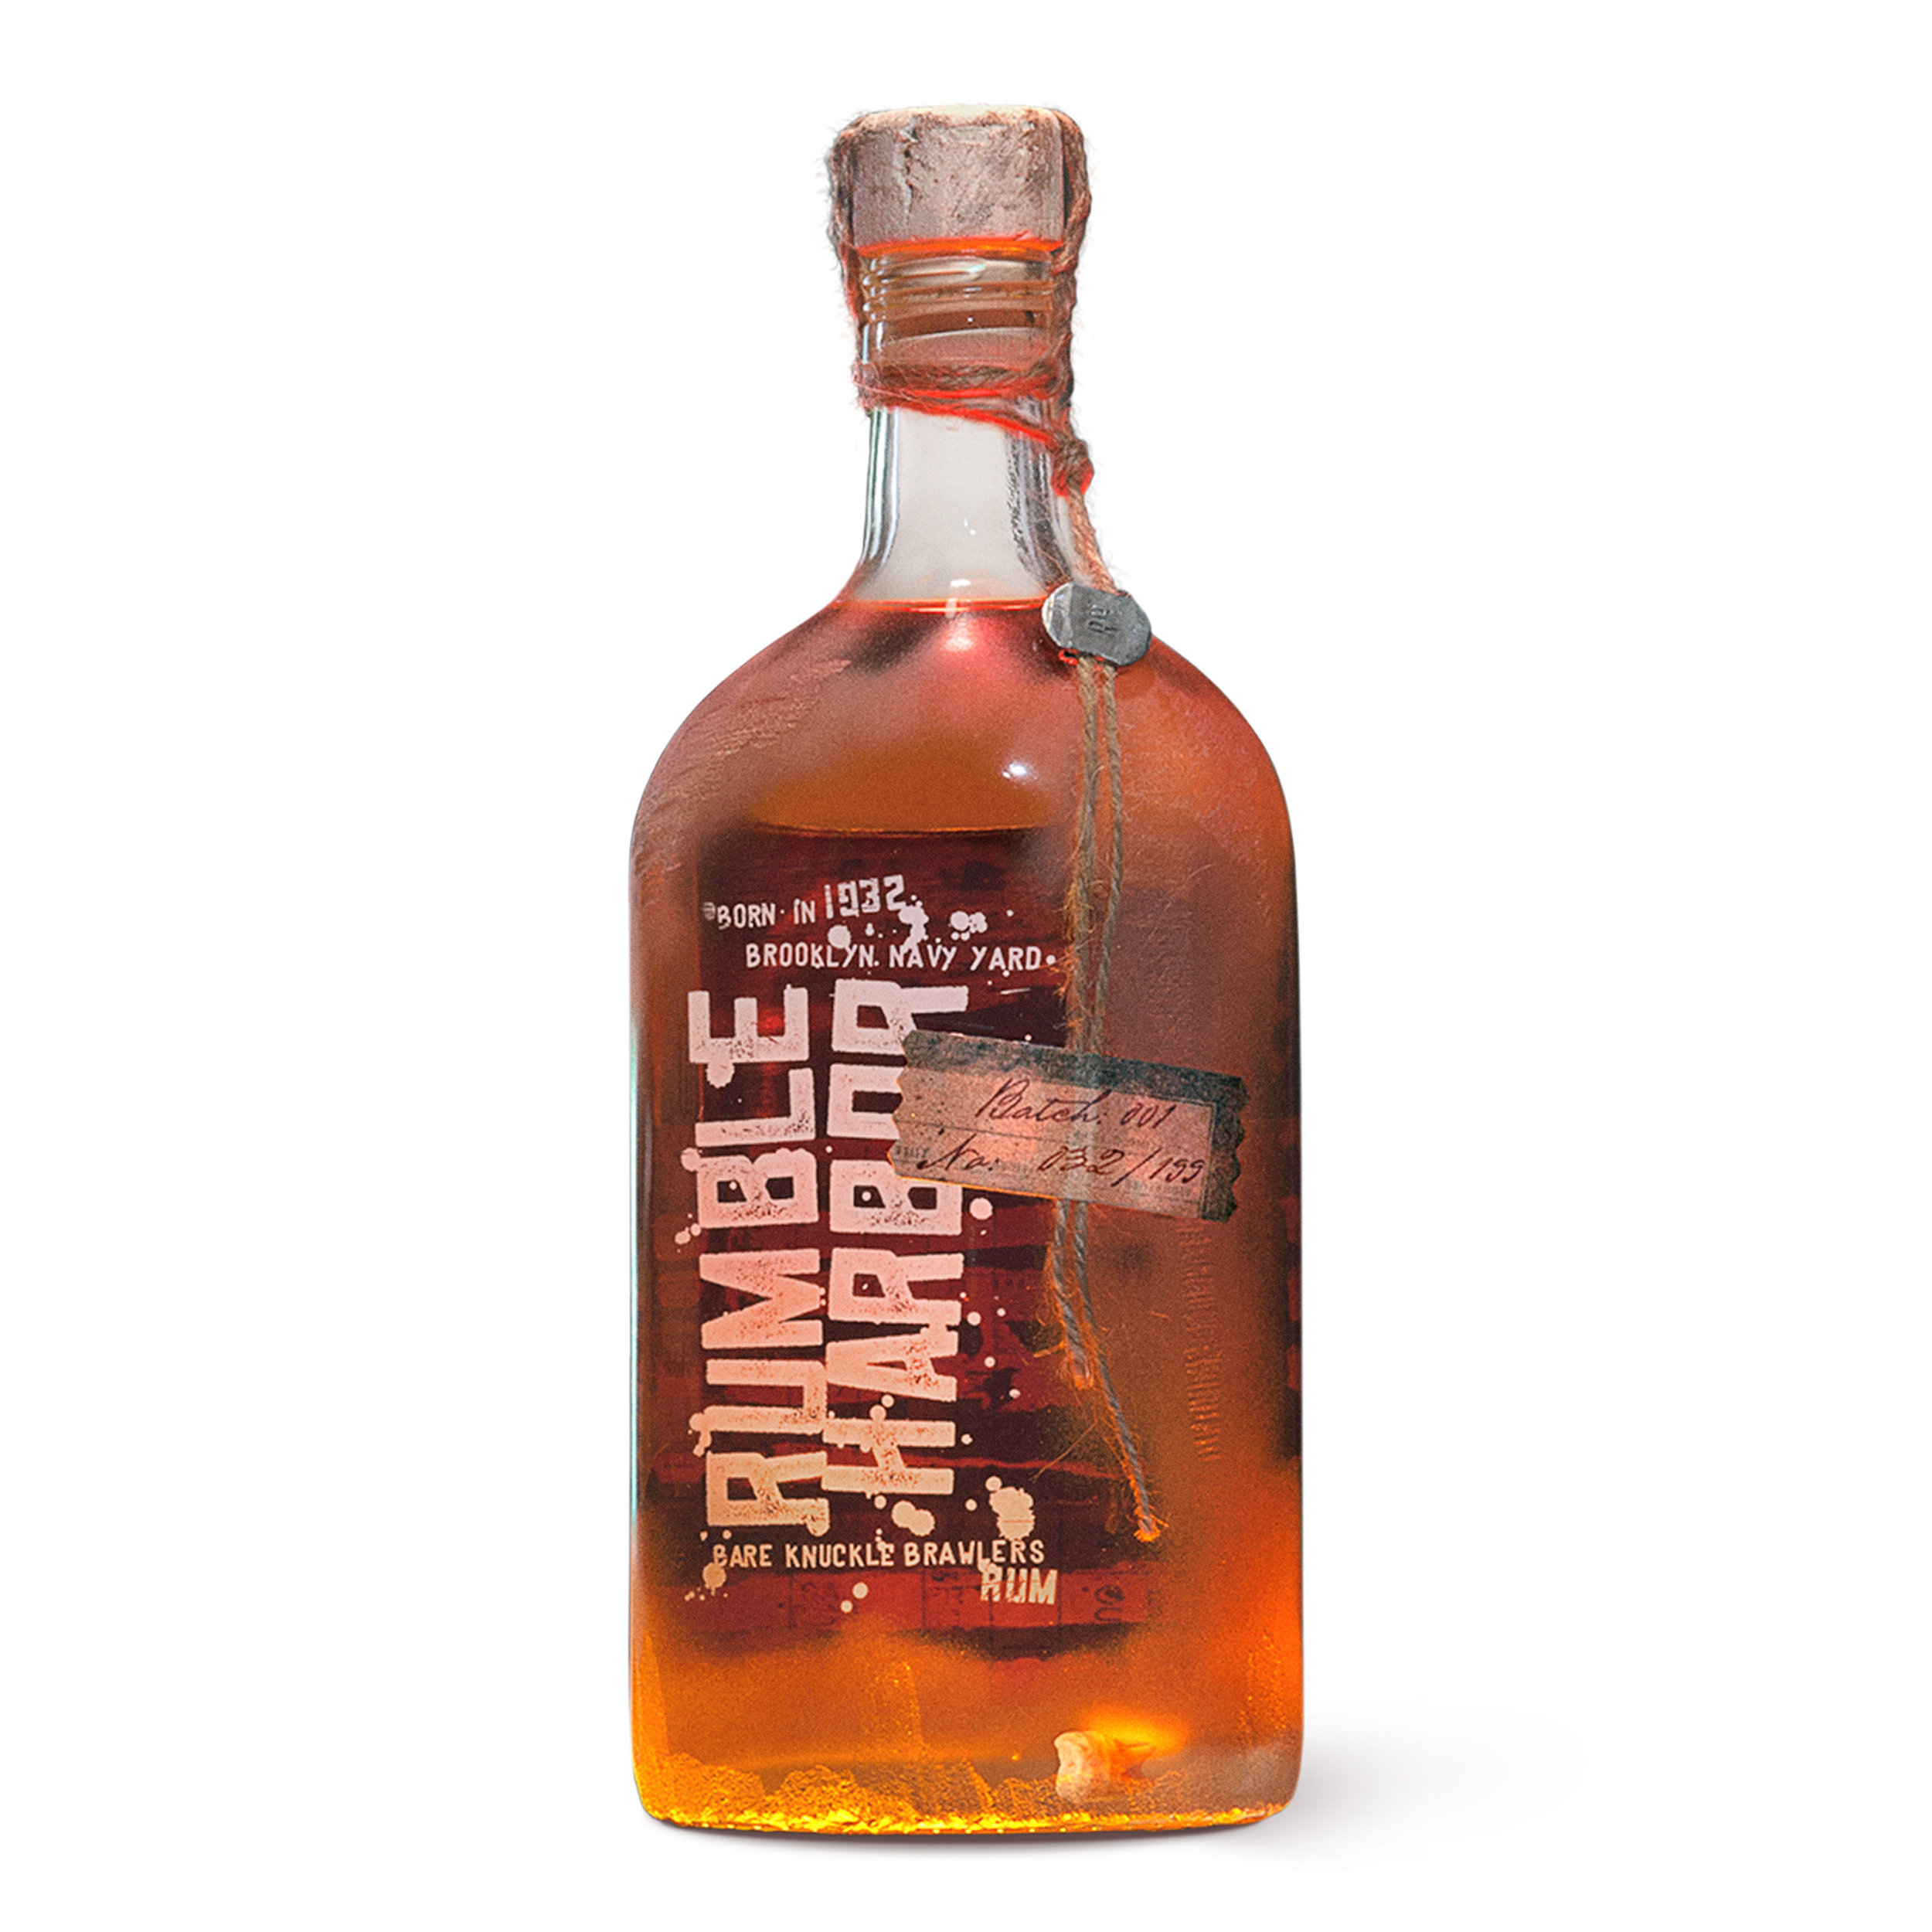 Rumble Harbor „The World’s only Bare Knuckle Brawlers Rum“